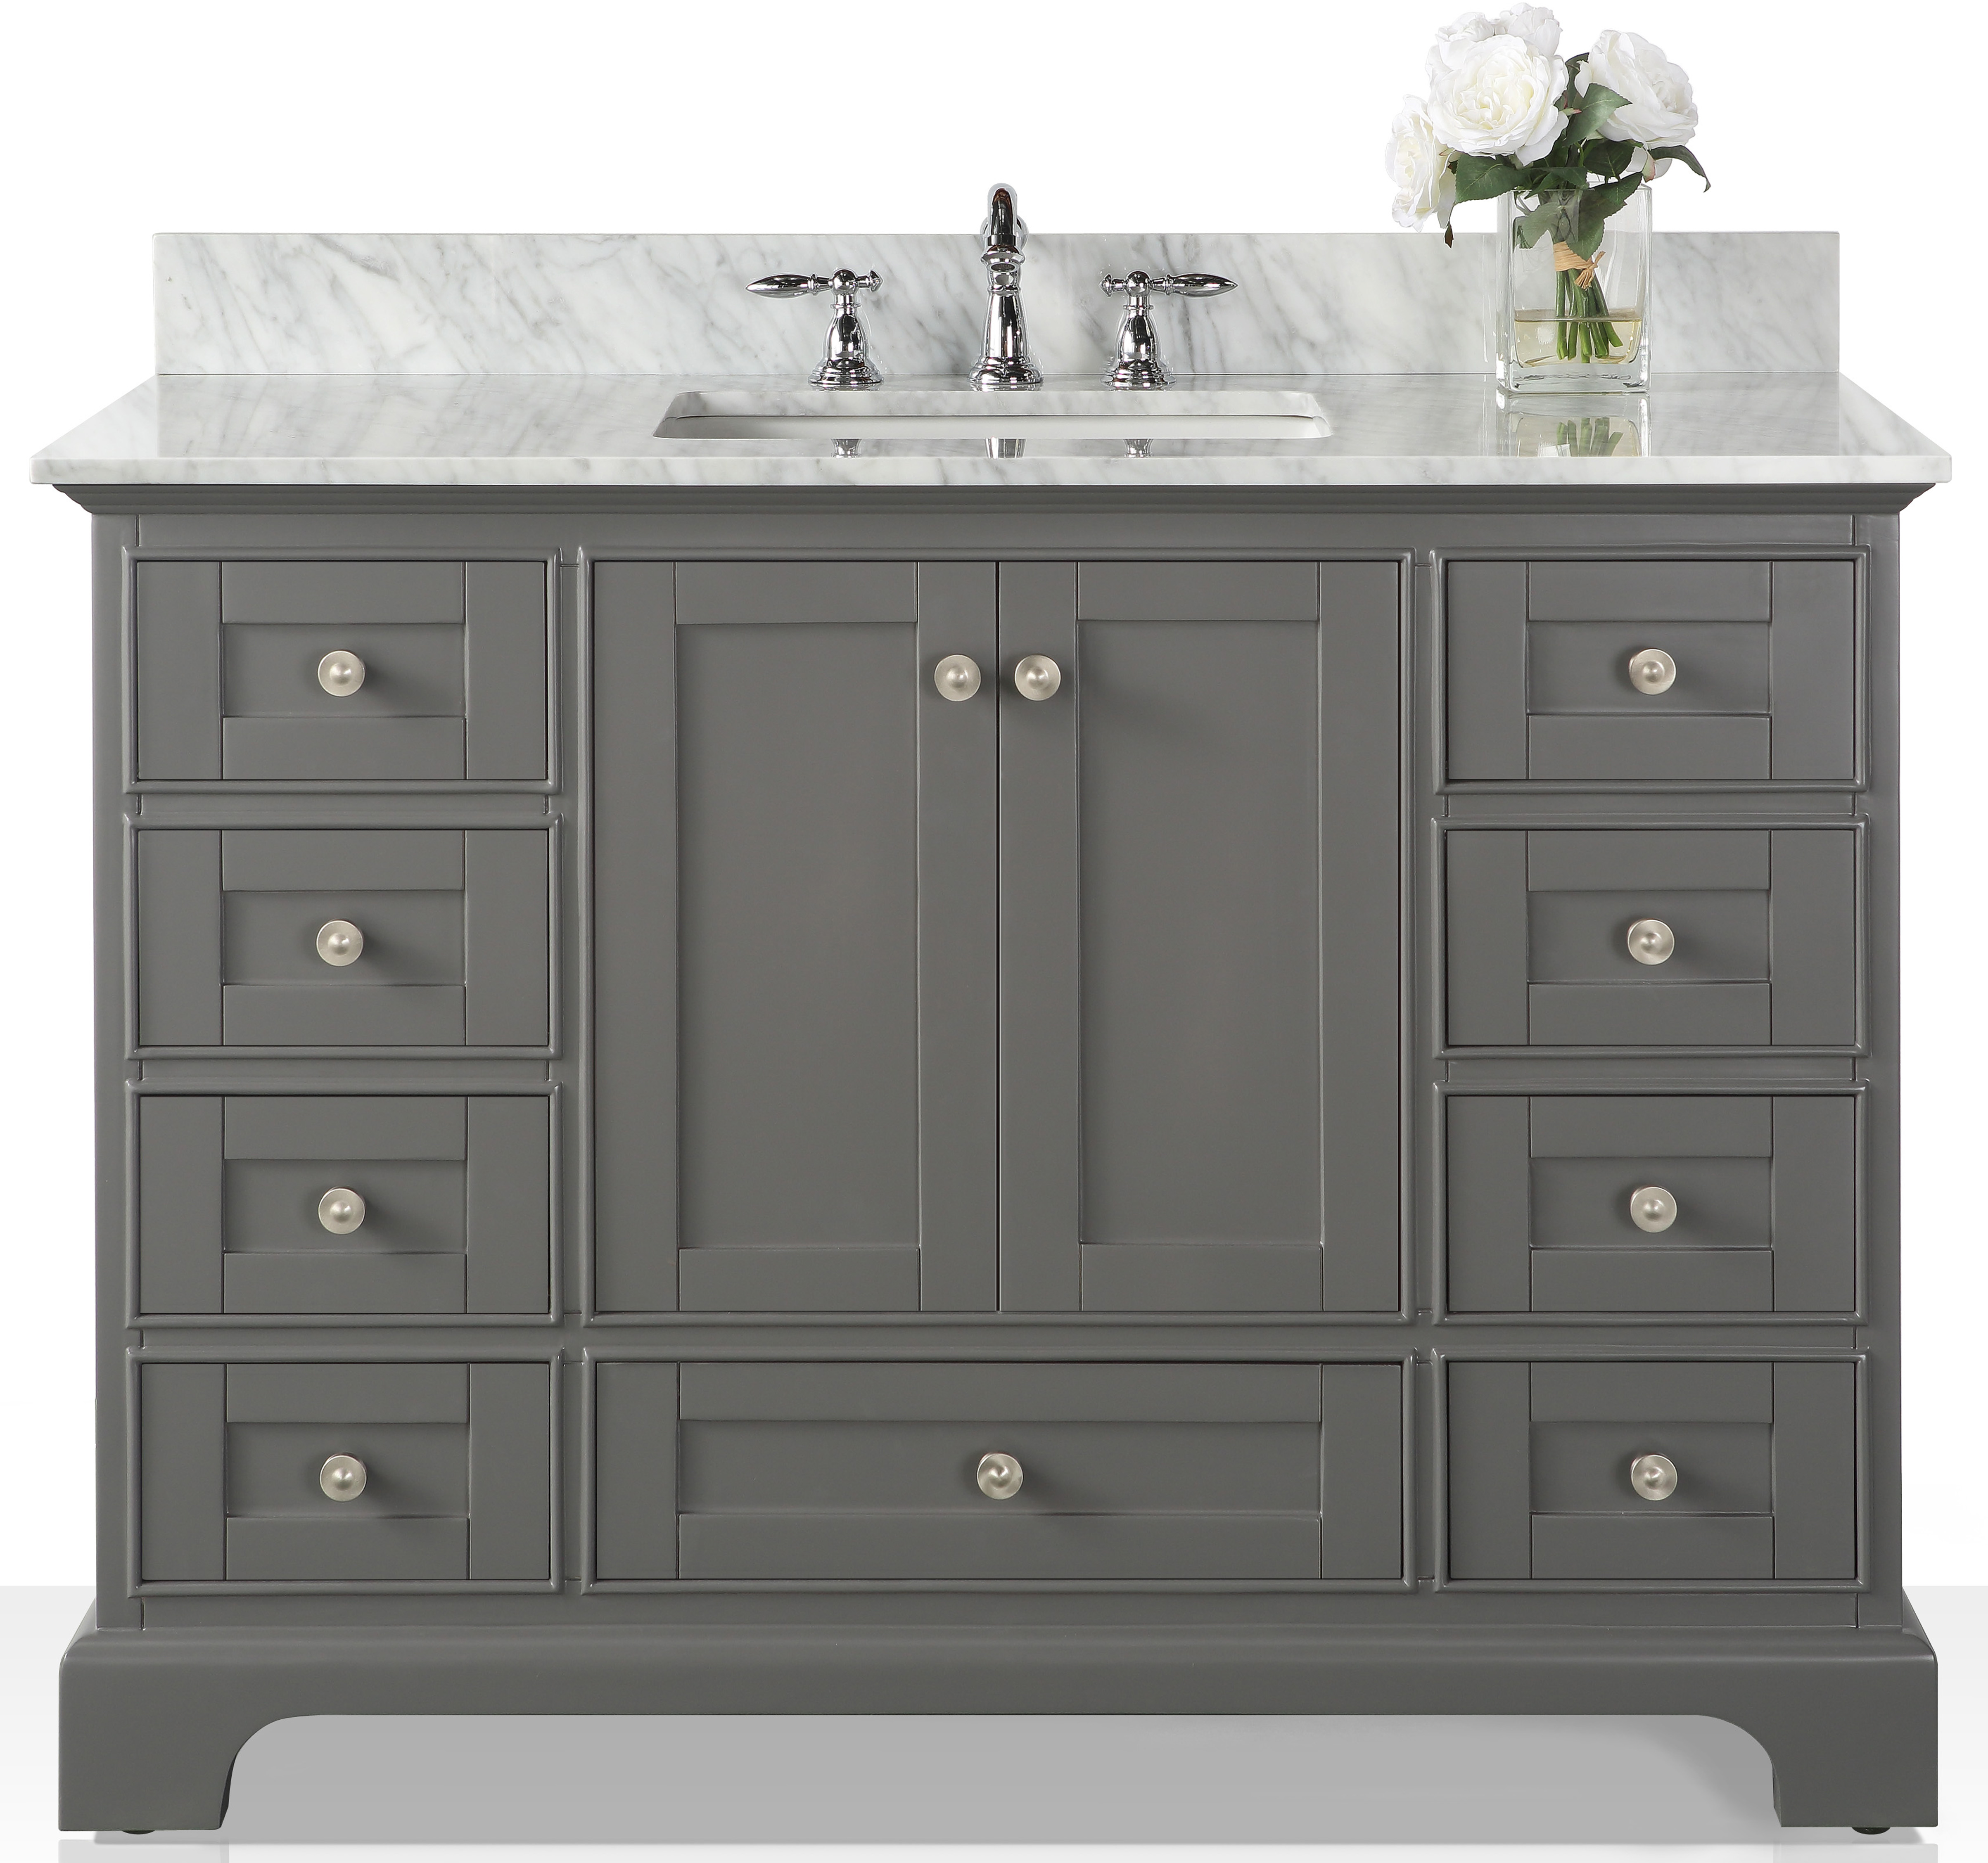 48" Bath Vanity Set in Sapphire Gray with Italian Carrara White Marble Vanity Top and White Undermount Basin with Mirror Option